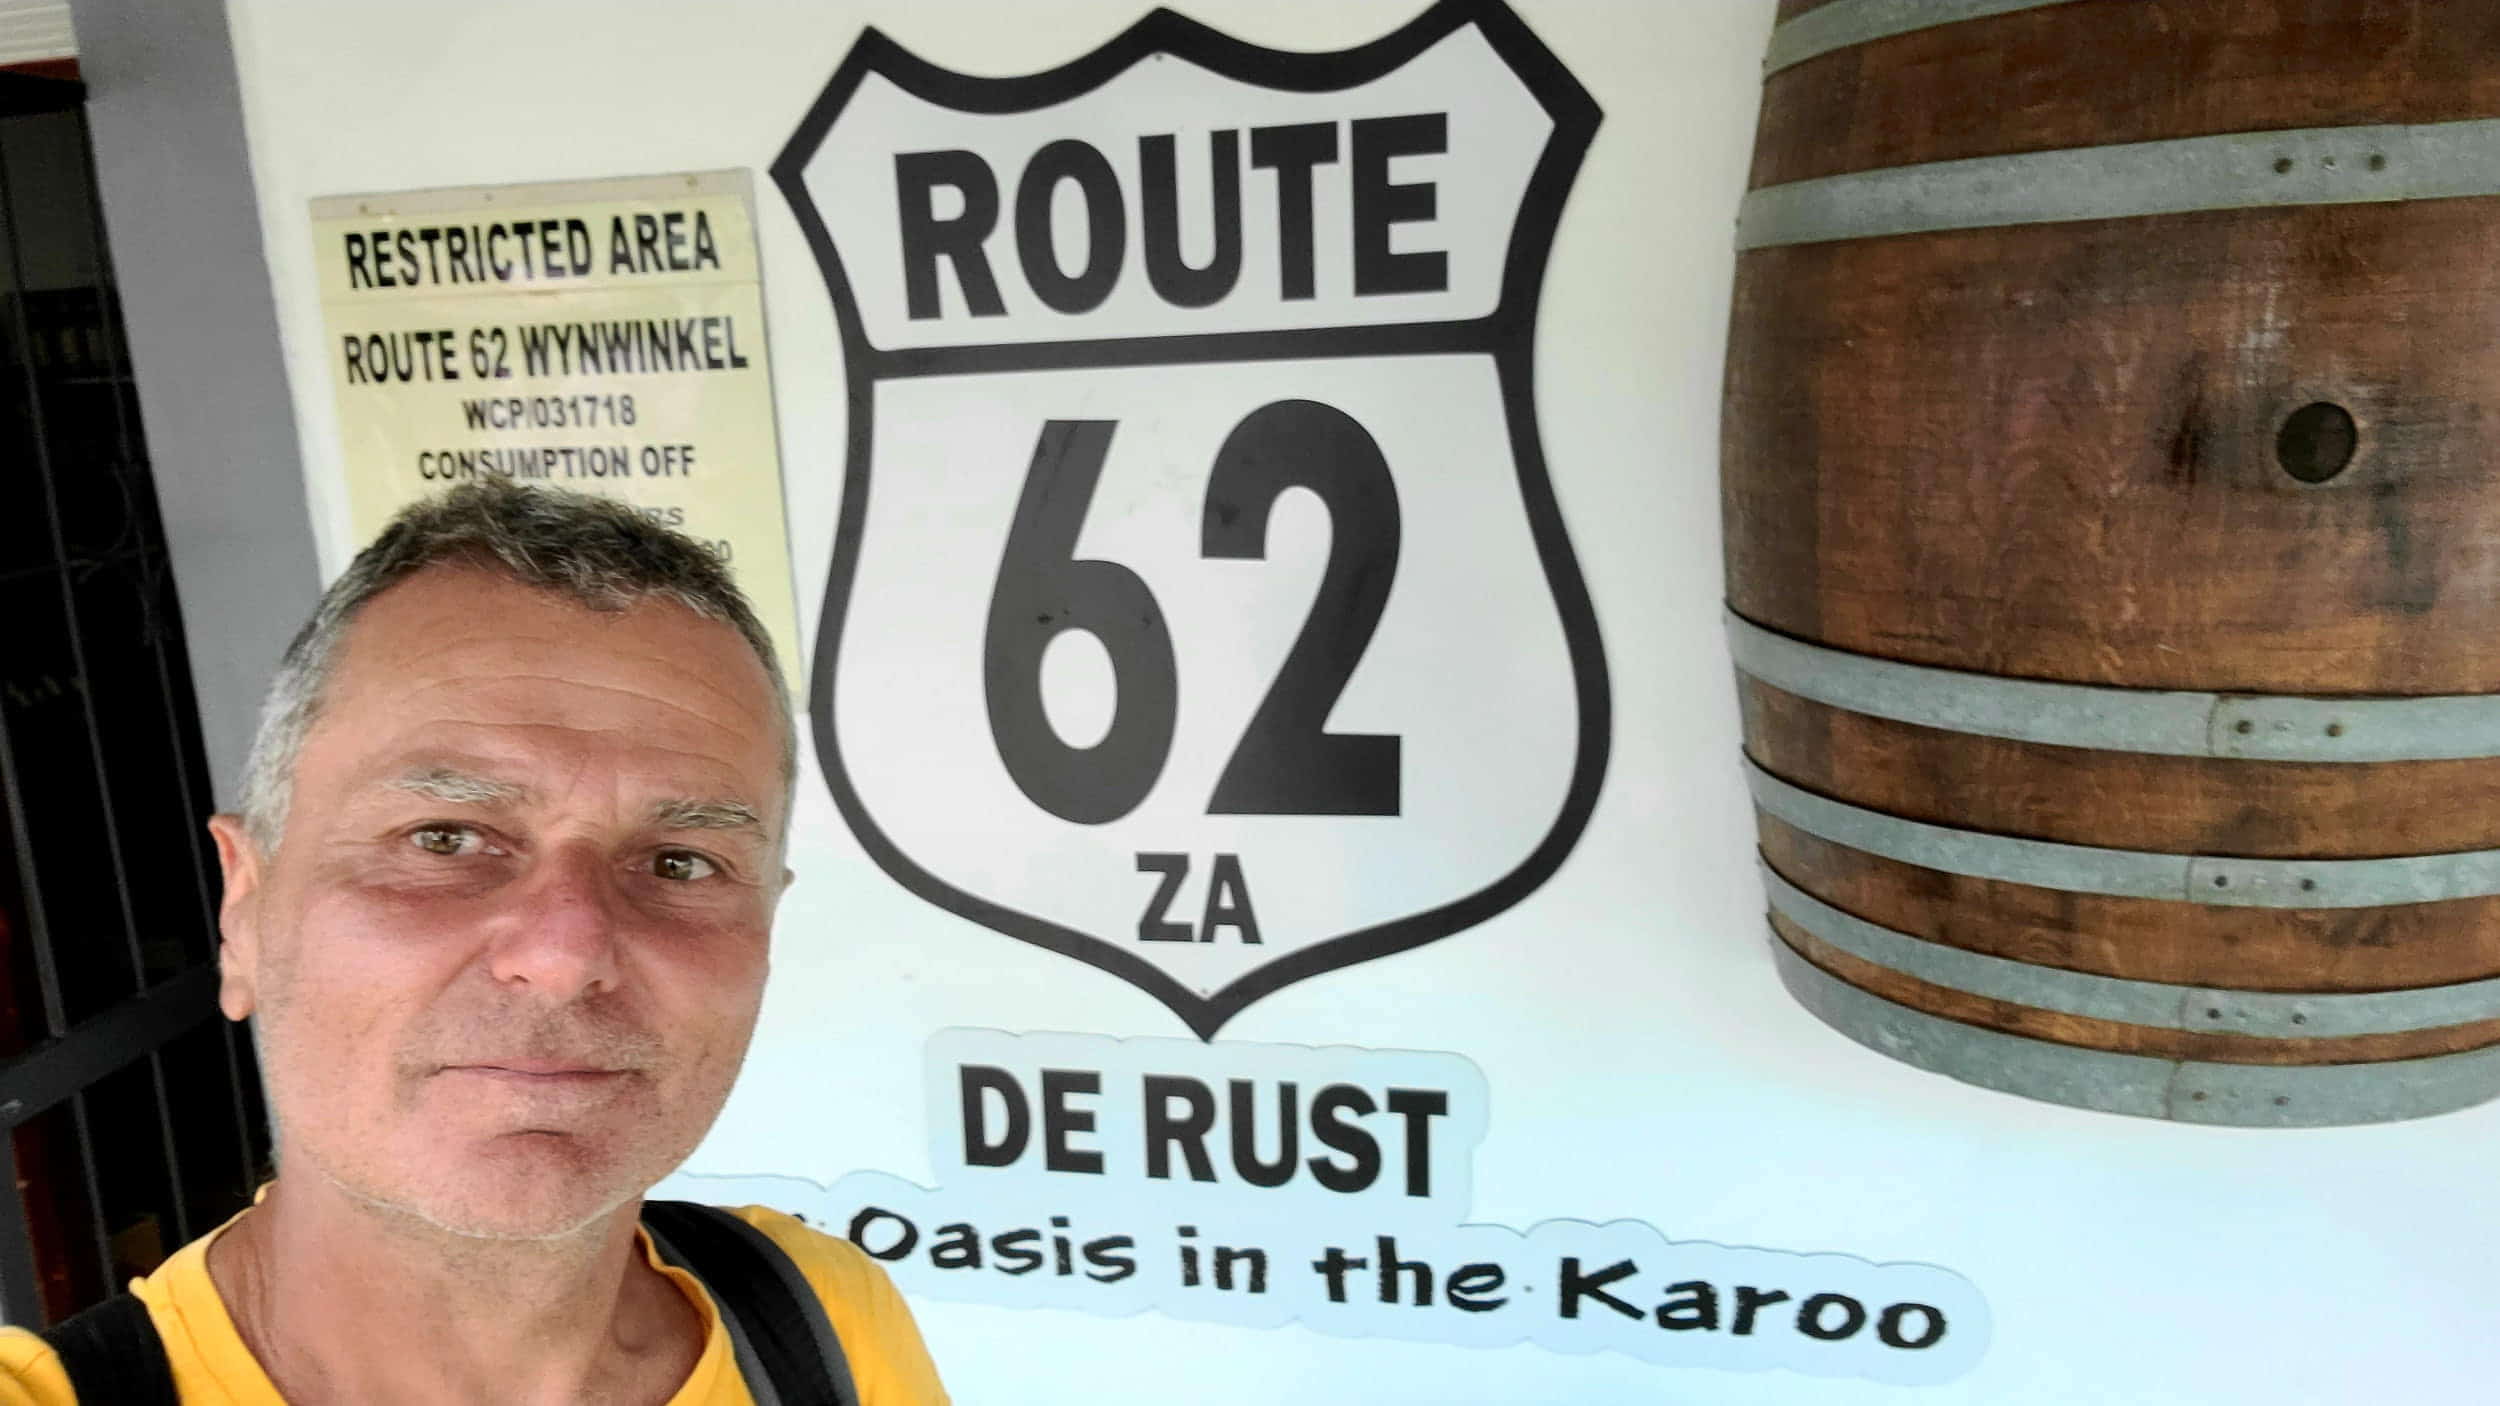 selfie next to a sign route 62